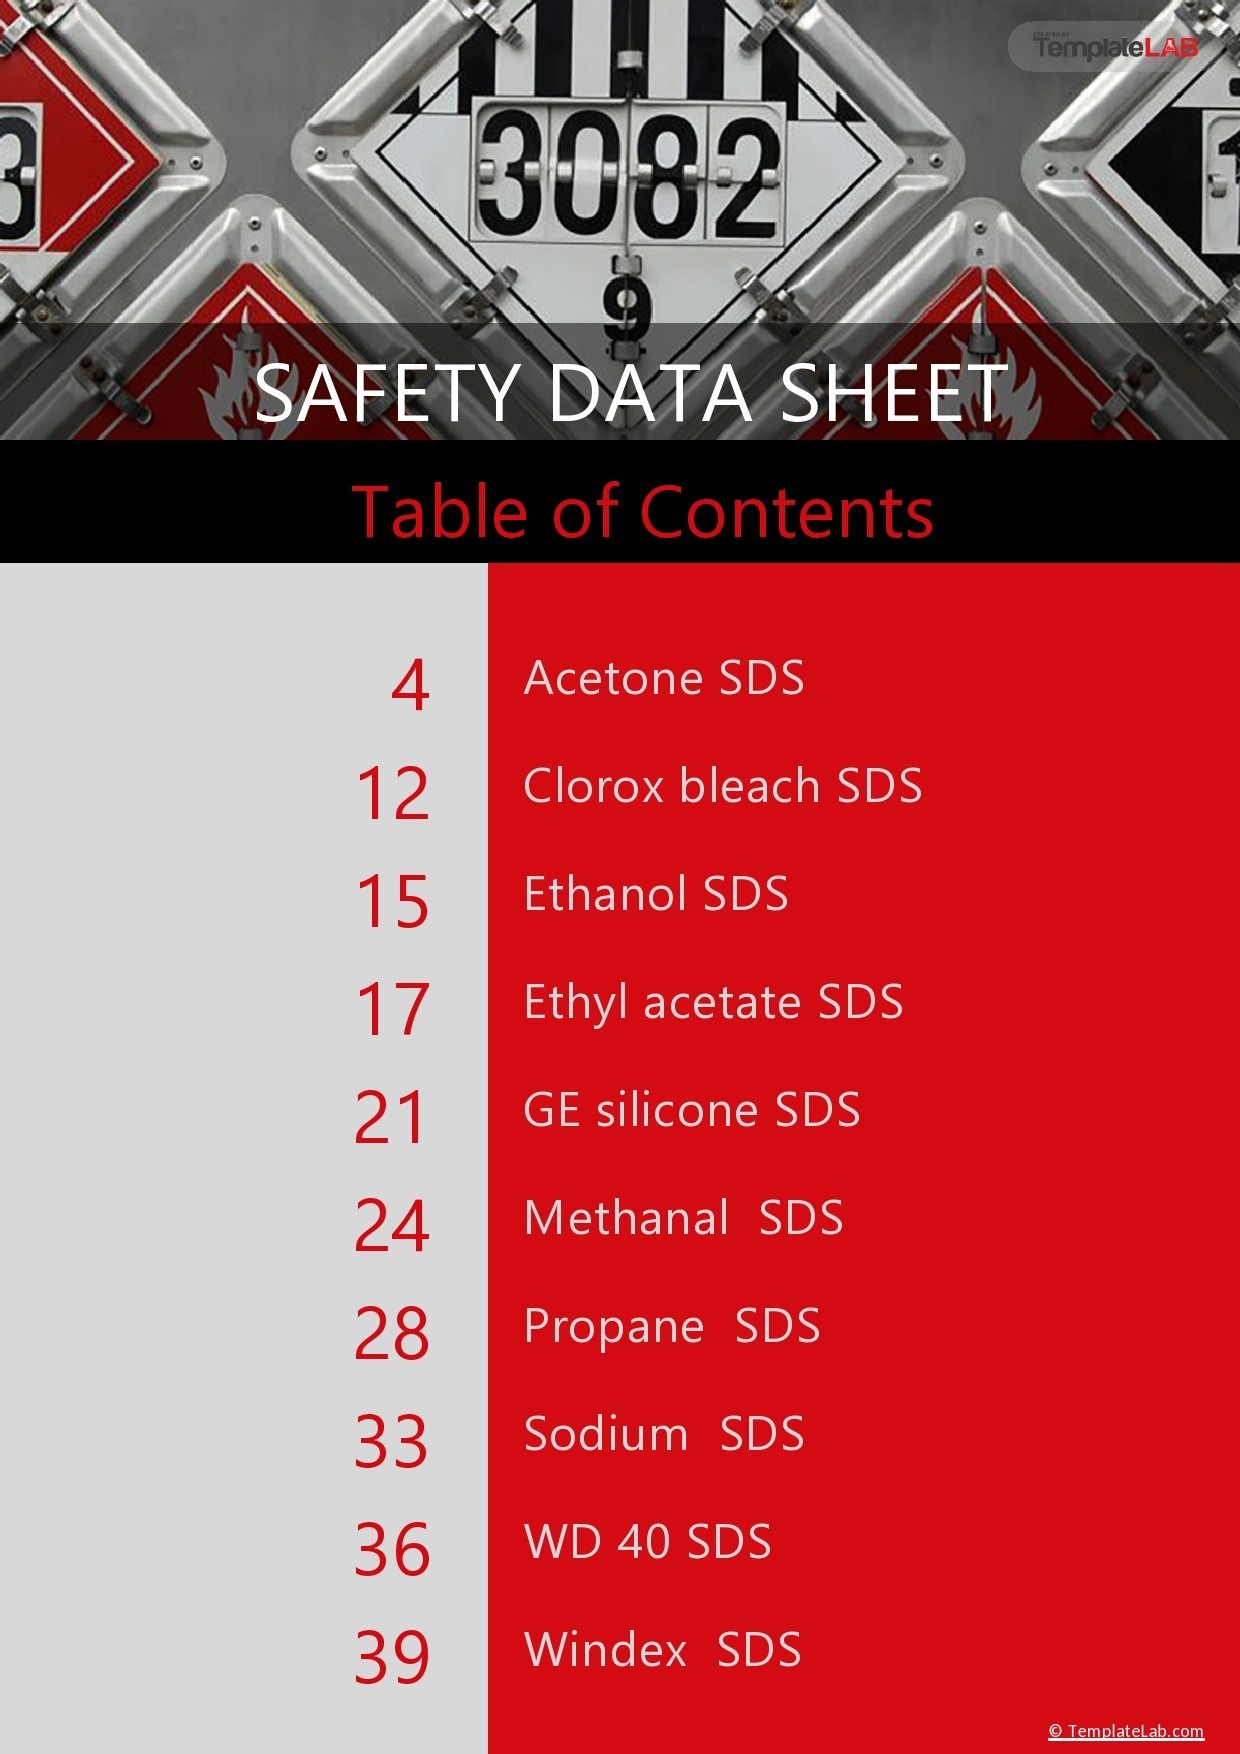 Free SDS Table of Contents - TemplateLab.com